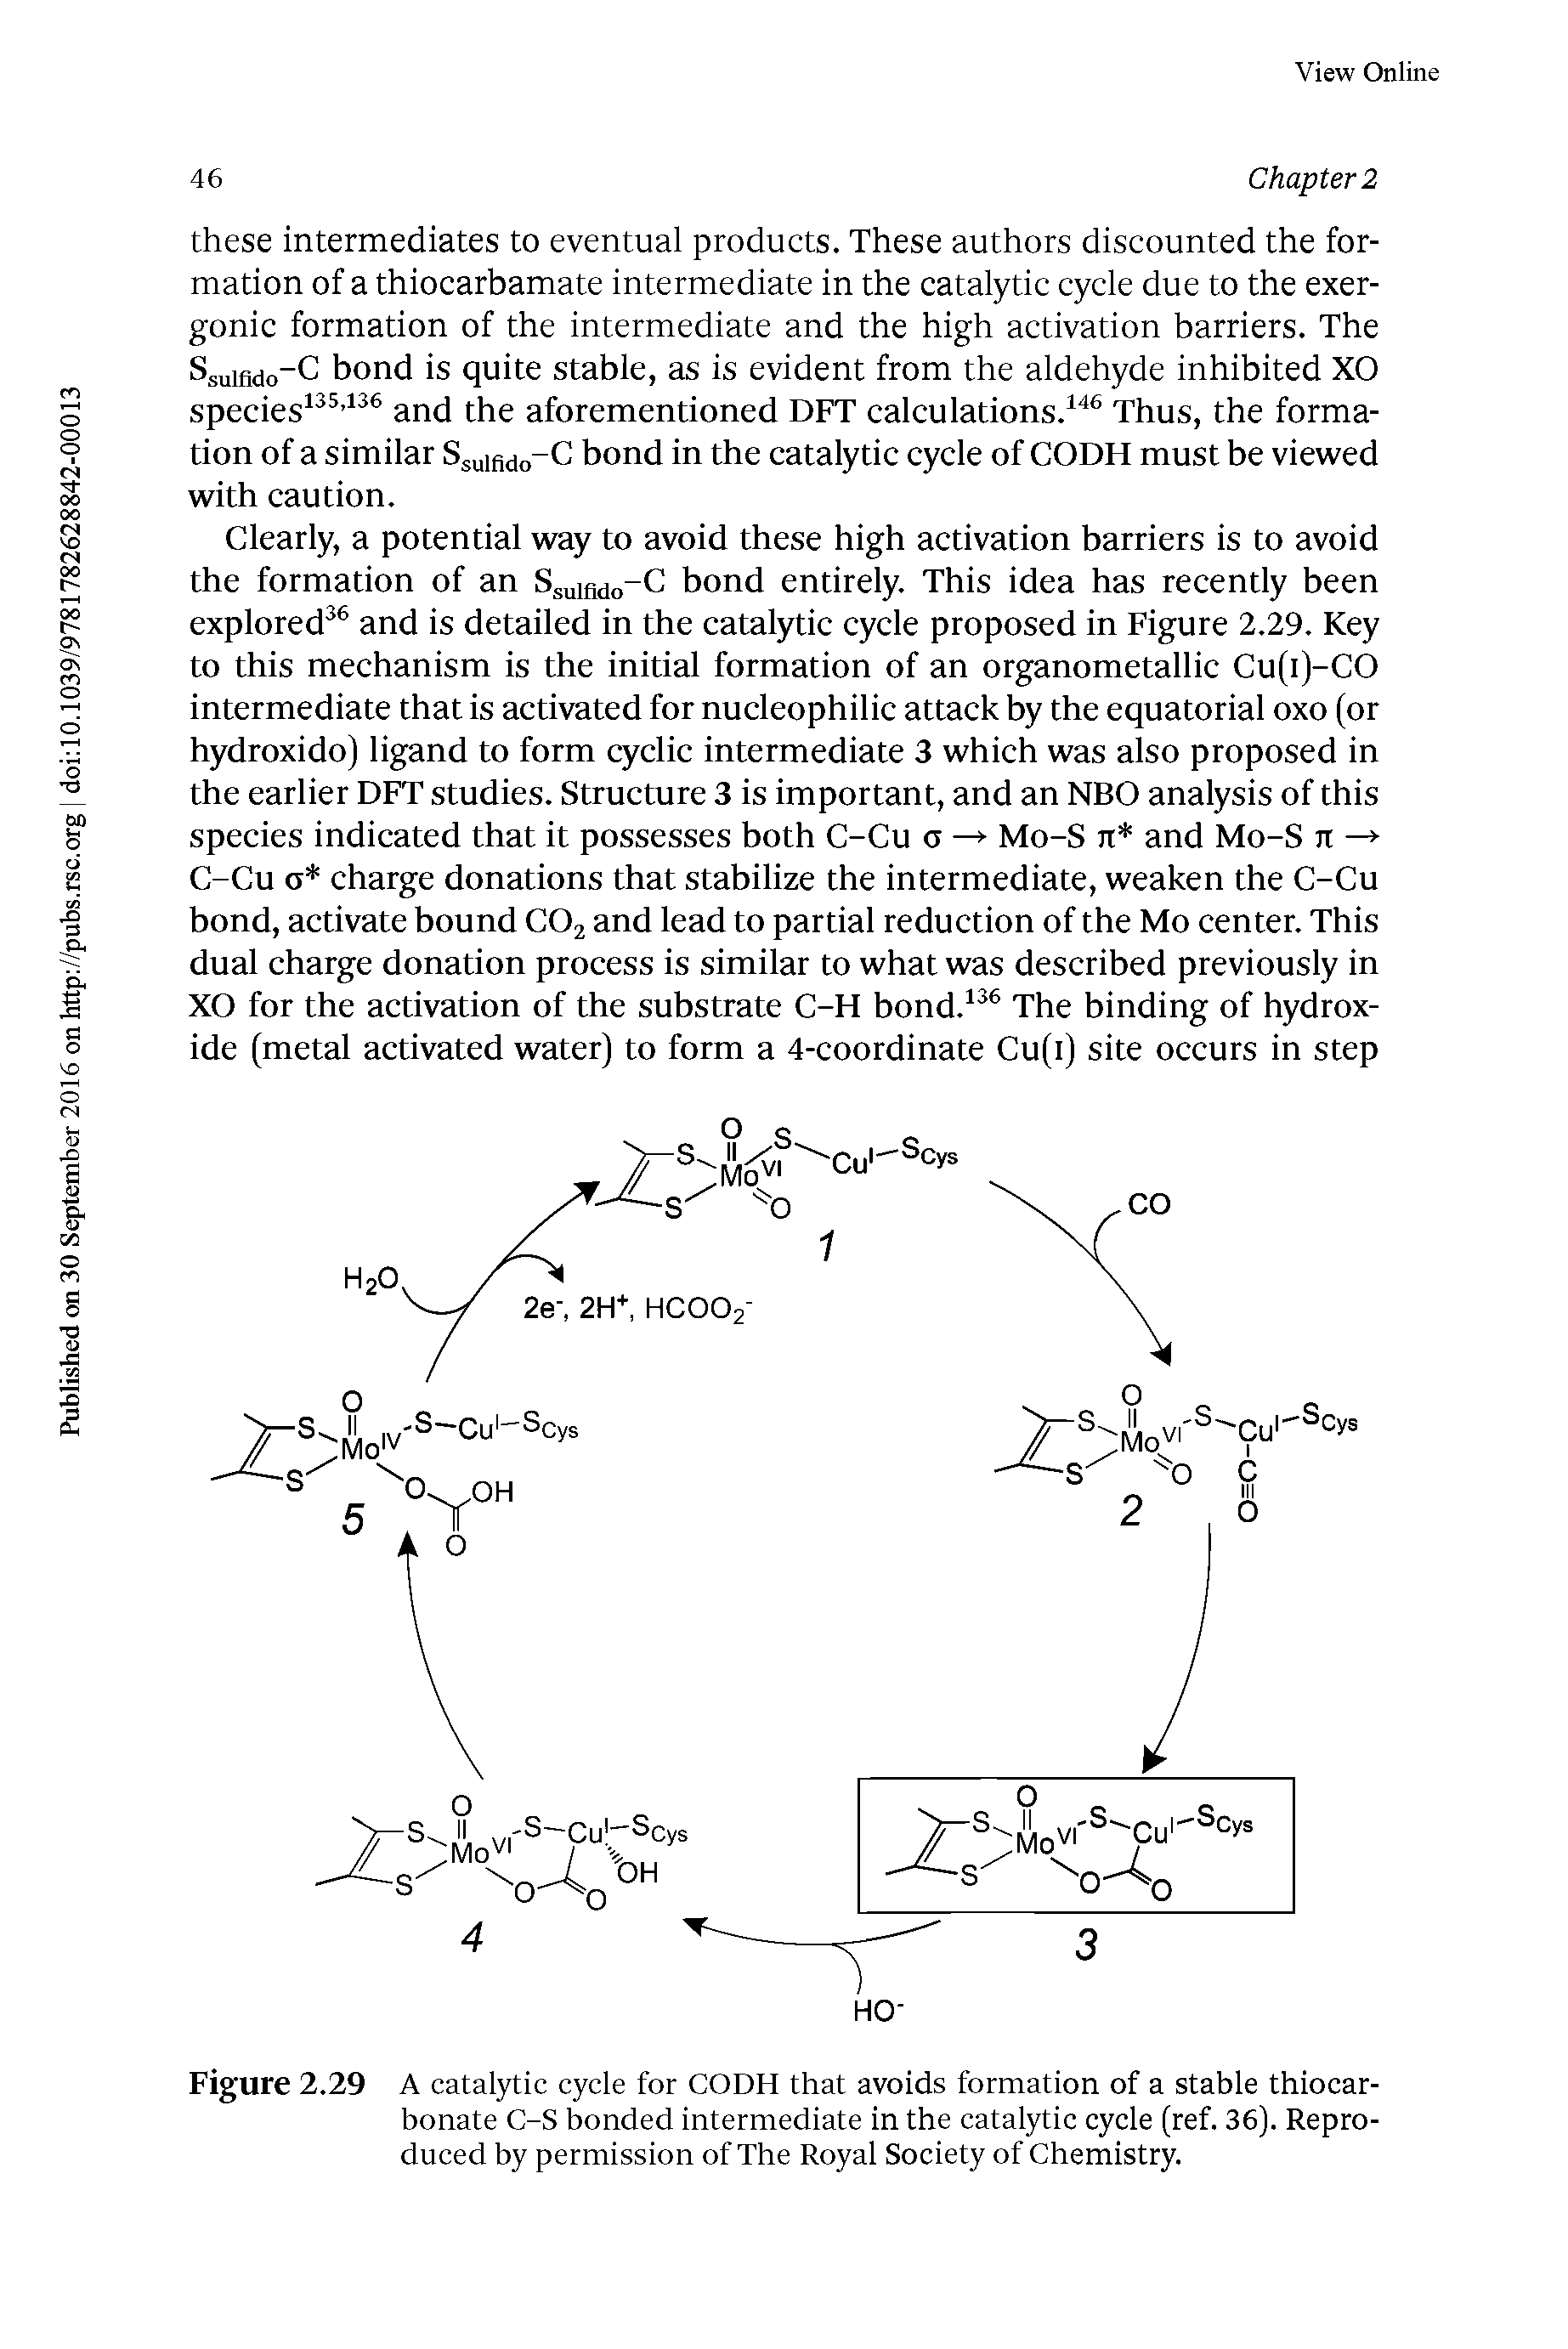 Figure 2.29 A catalytic cycle for CODH that avoids formation of a stable thiocar-bonate C-S bonded intermediate in the catalytic cycle (ref. 36). Reproduced by permission of The Royal Society of Chemistry.